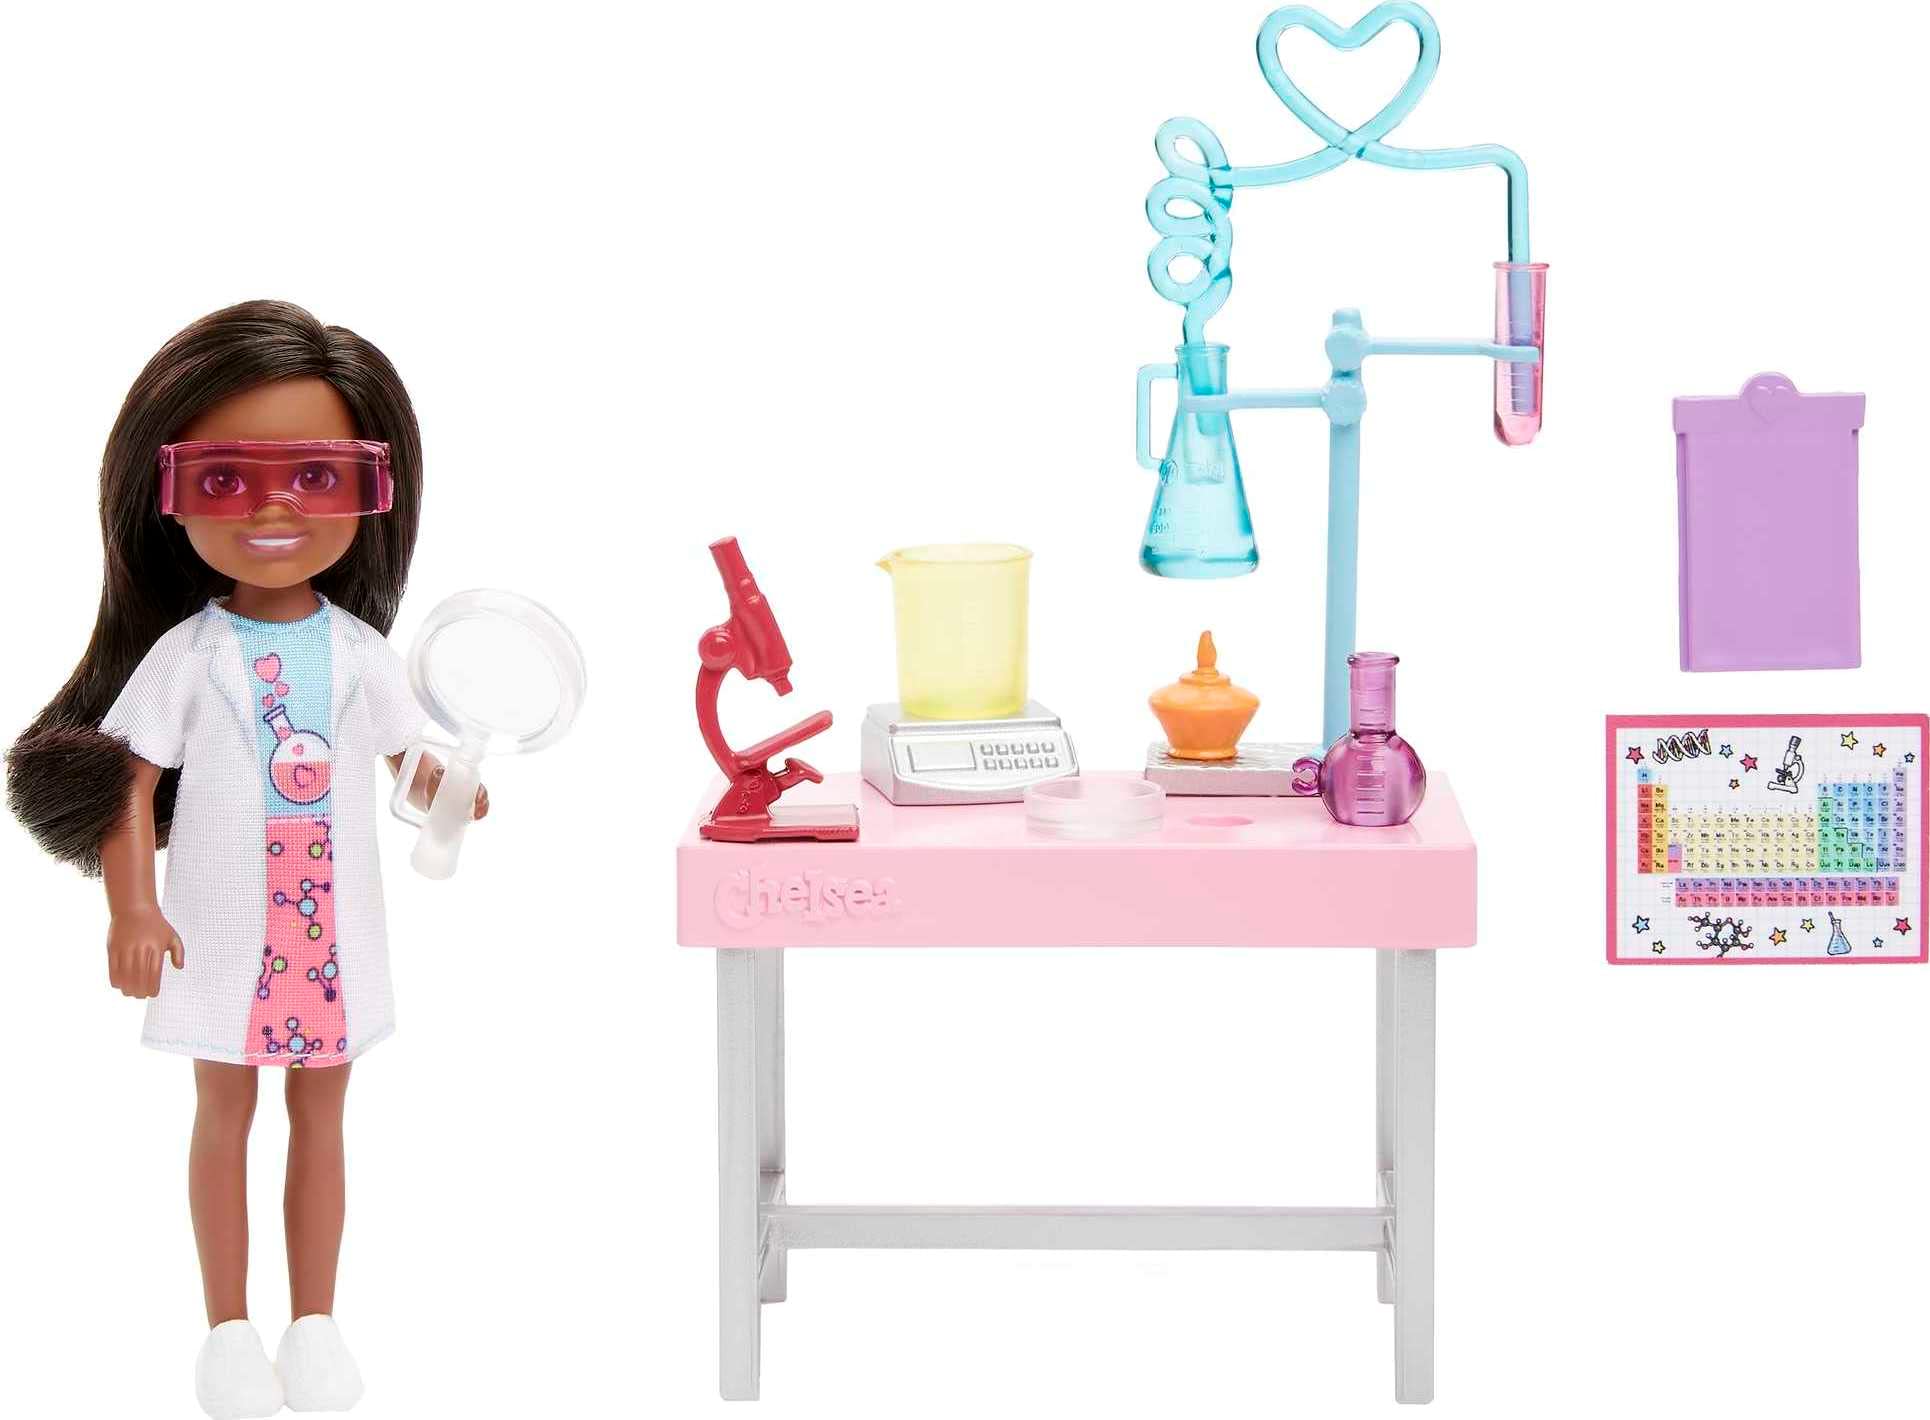 Barbie Chelsea Can Be Doll & Playset, Brunette Scientist Small Doll with Toy Chemistry Lab Table & Stem-Themed Accessories